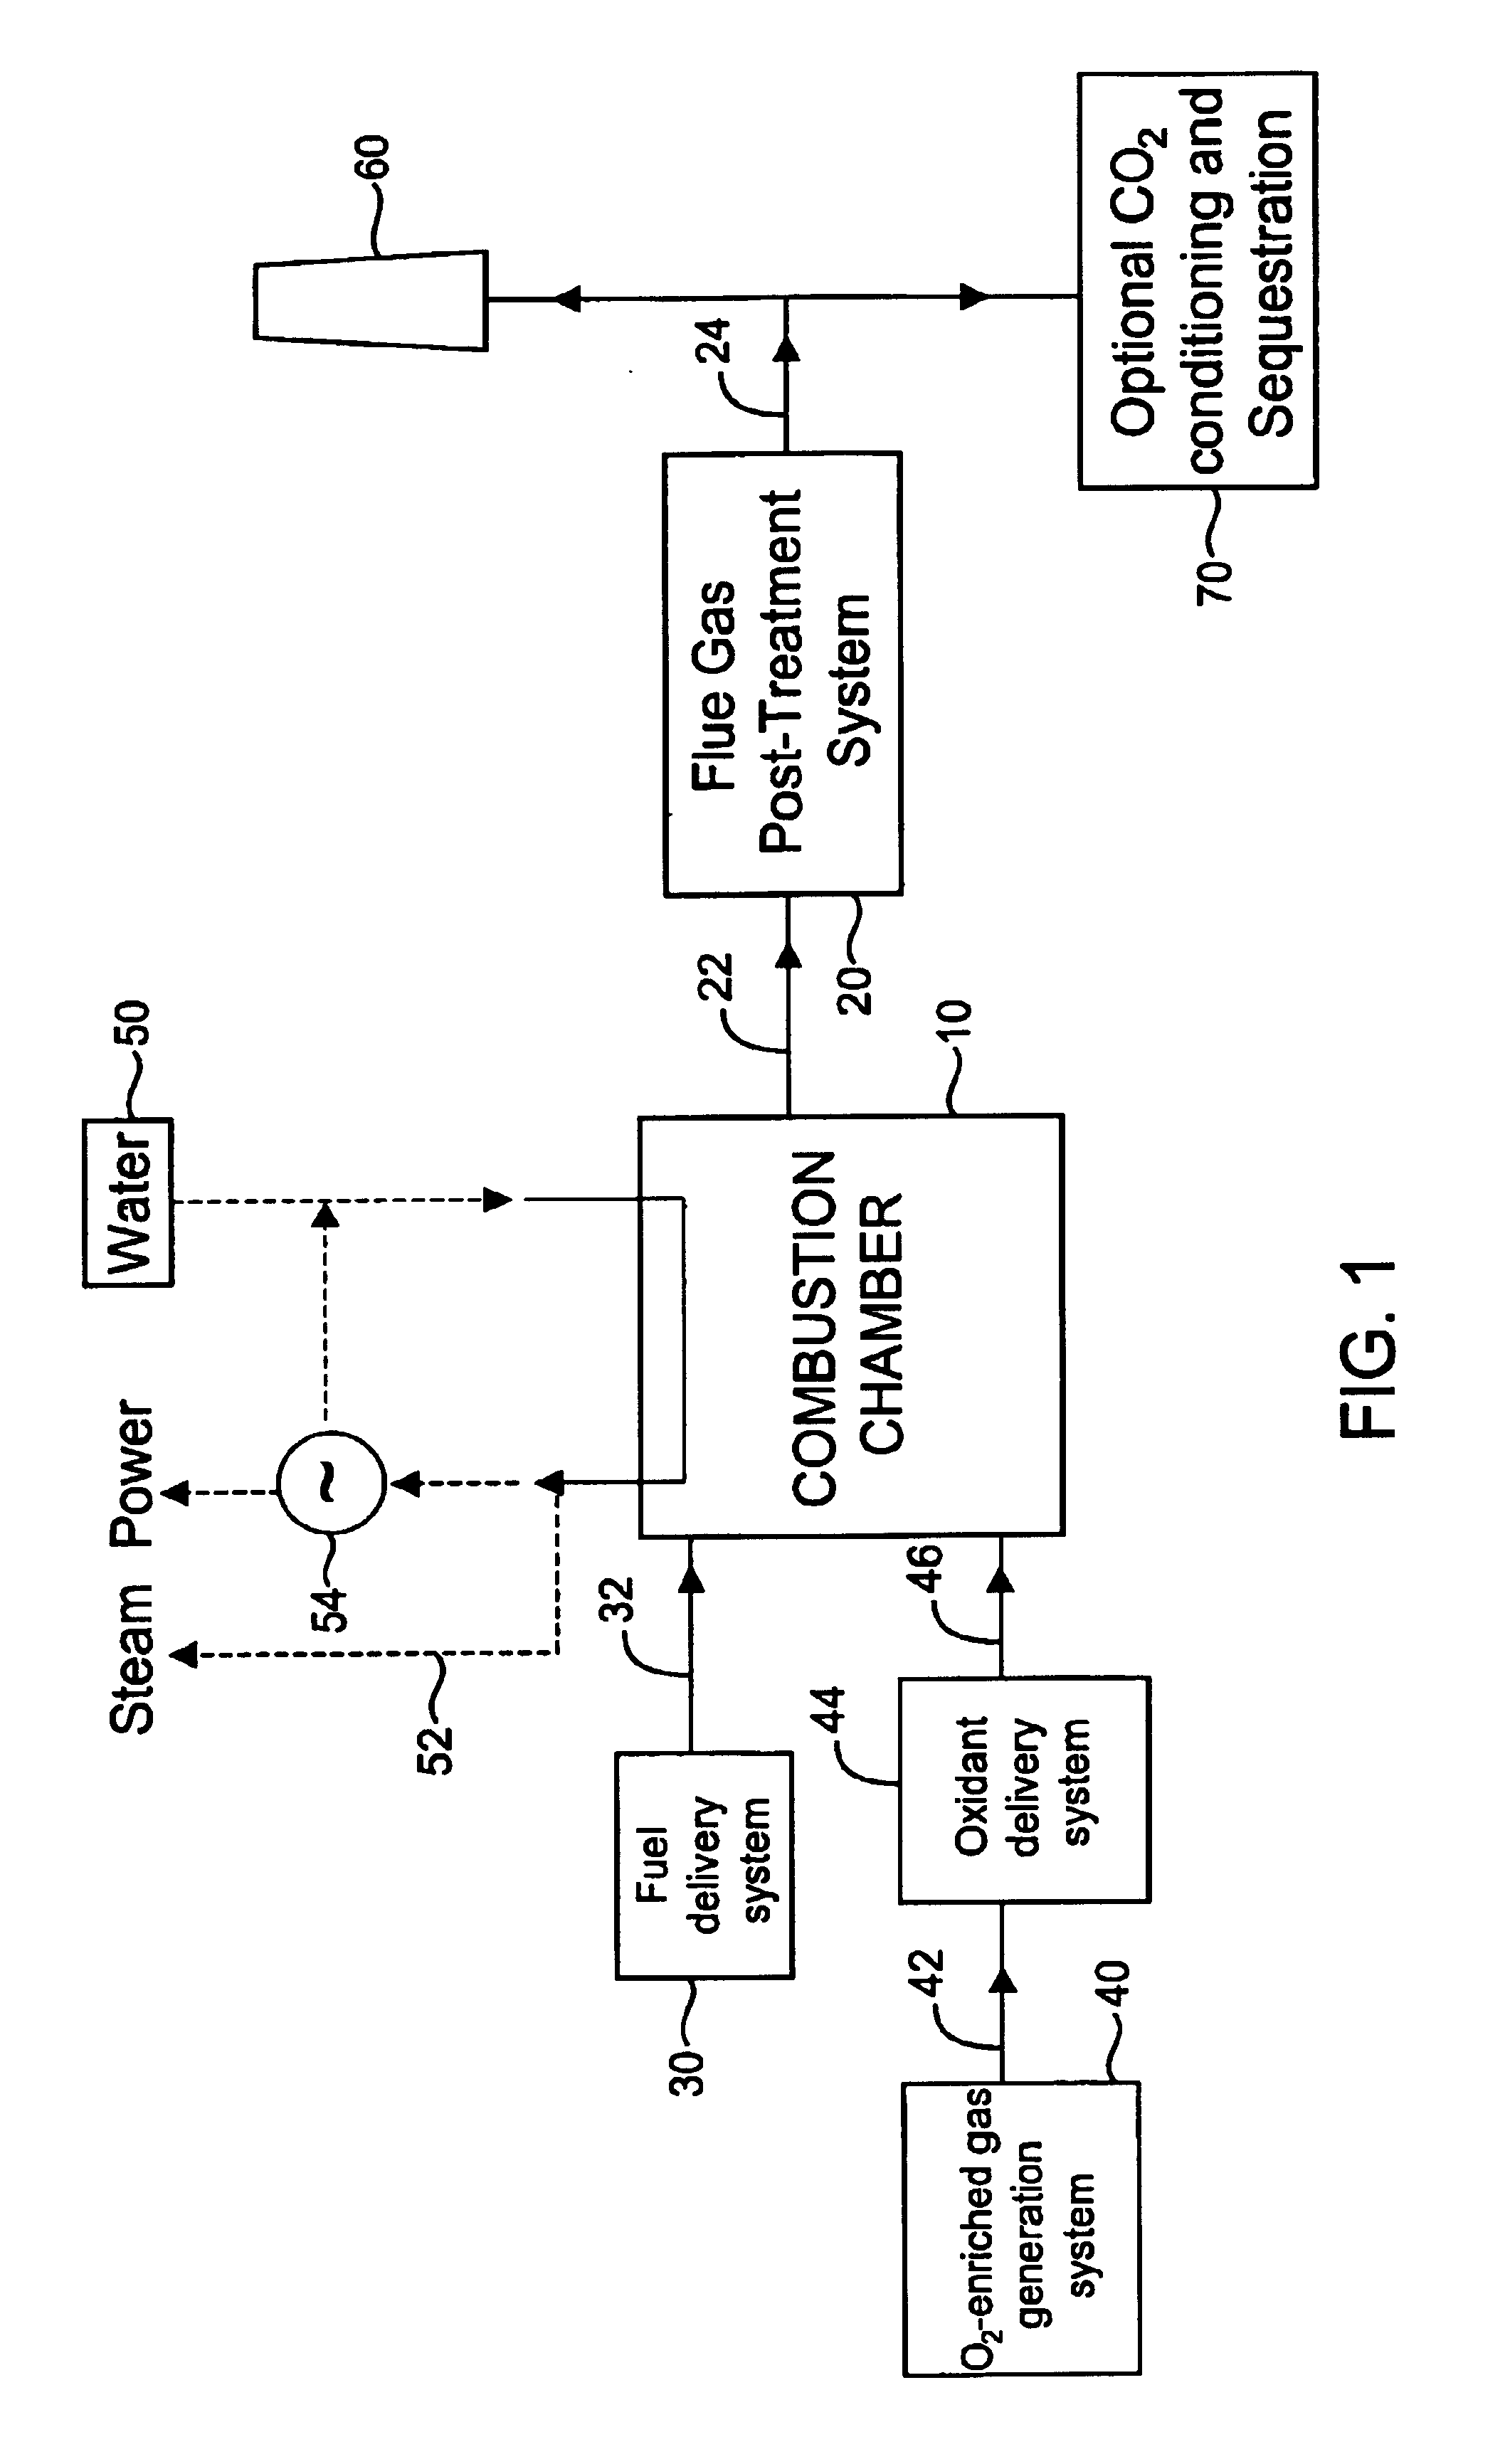 Steam-generating combustion system and method for emission control using oxygen enhancement